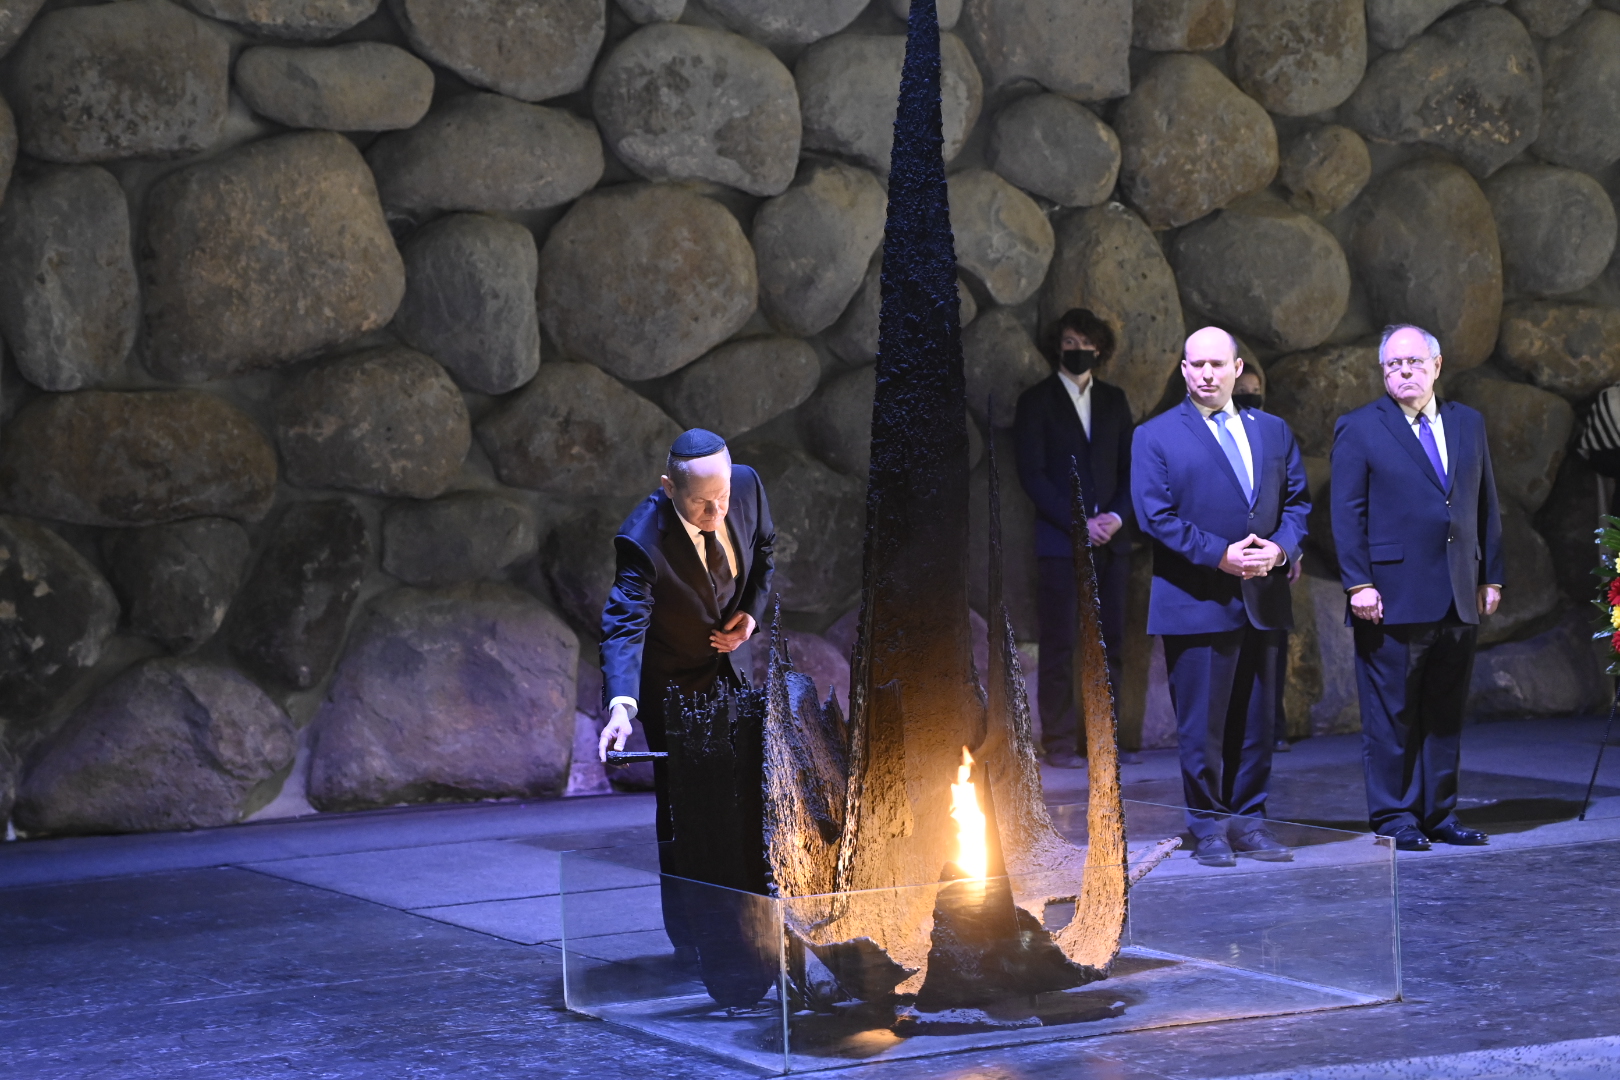 Chancellor Olaf Scholz reignites the Eternal Flame in the Hall of Remembrance